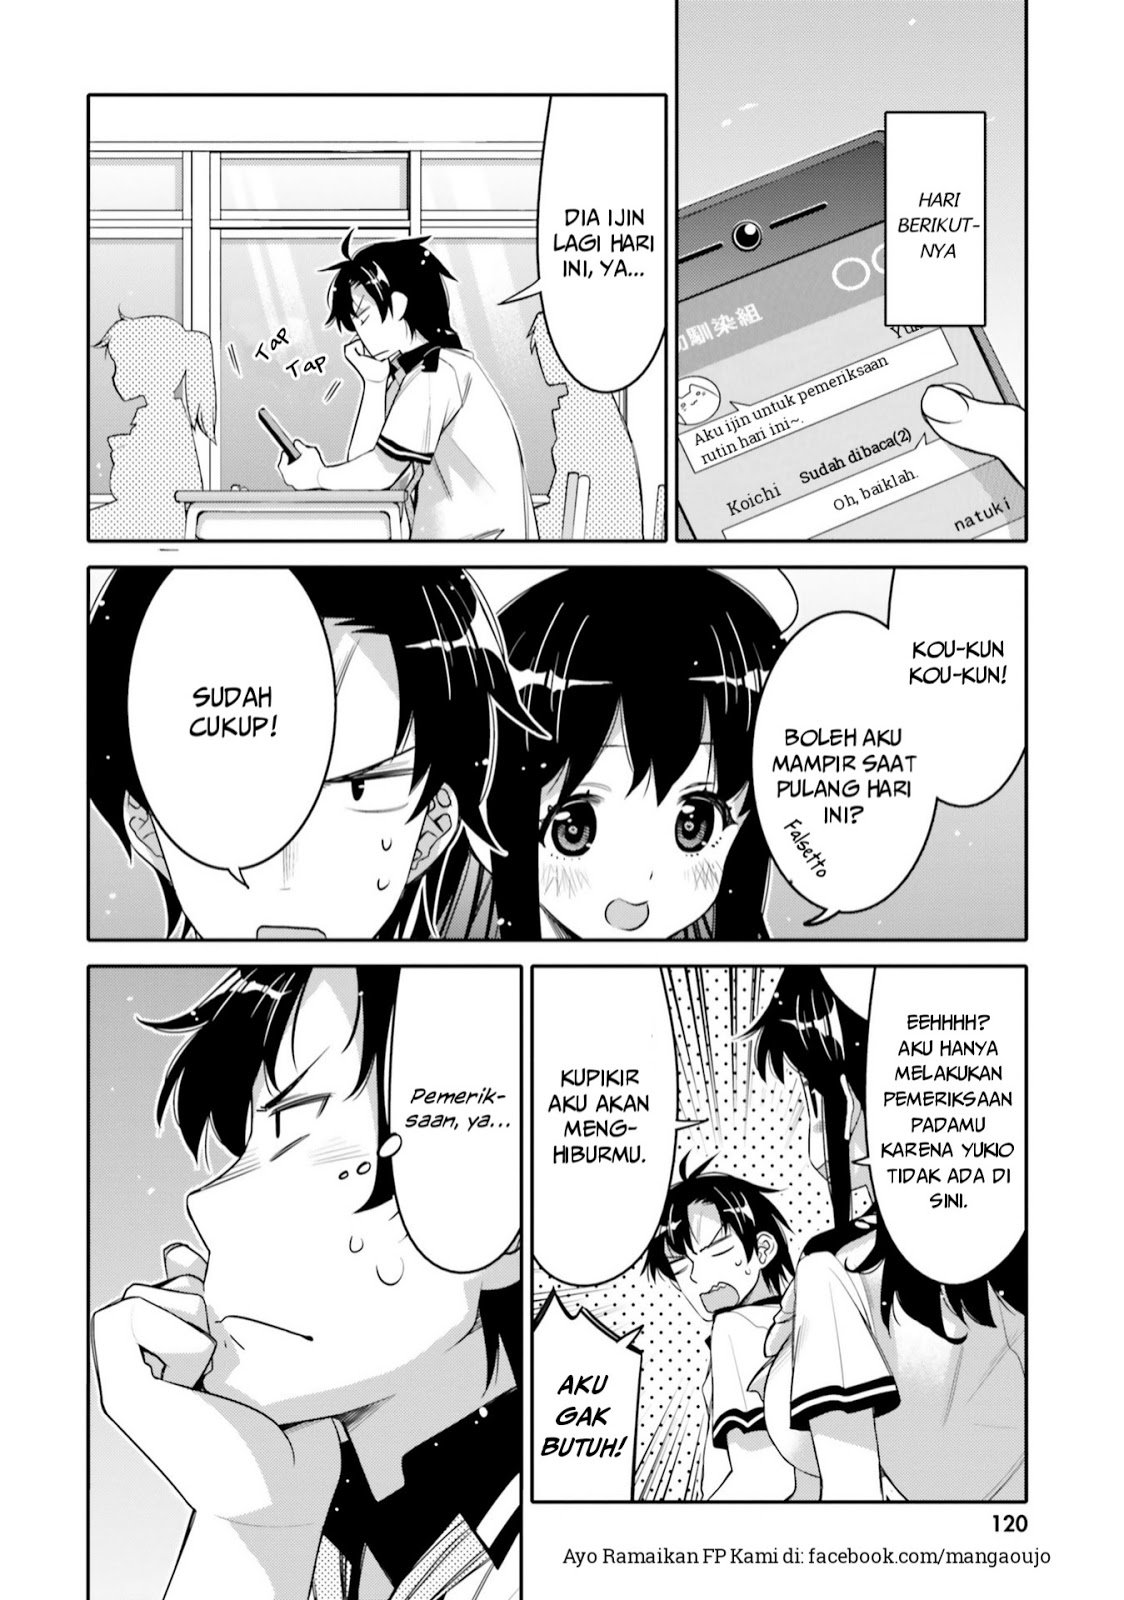 I am Worried that my Childhood Friend is too Cute! Chapter 06